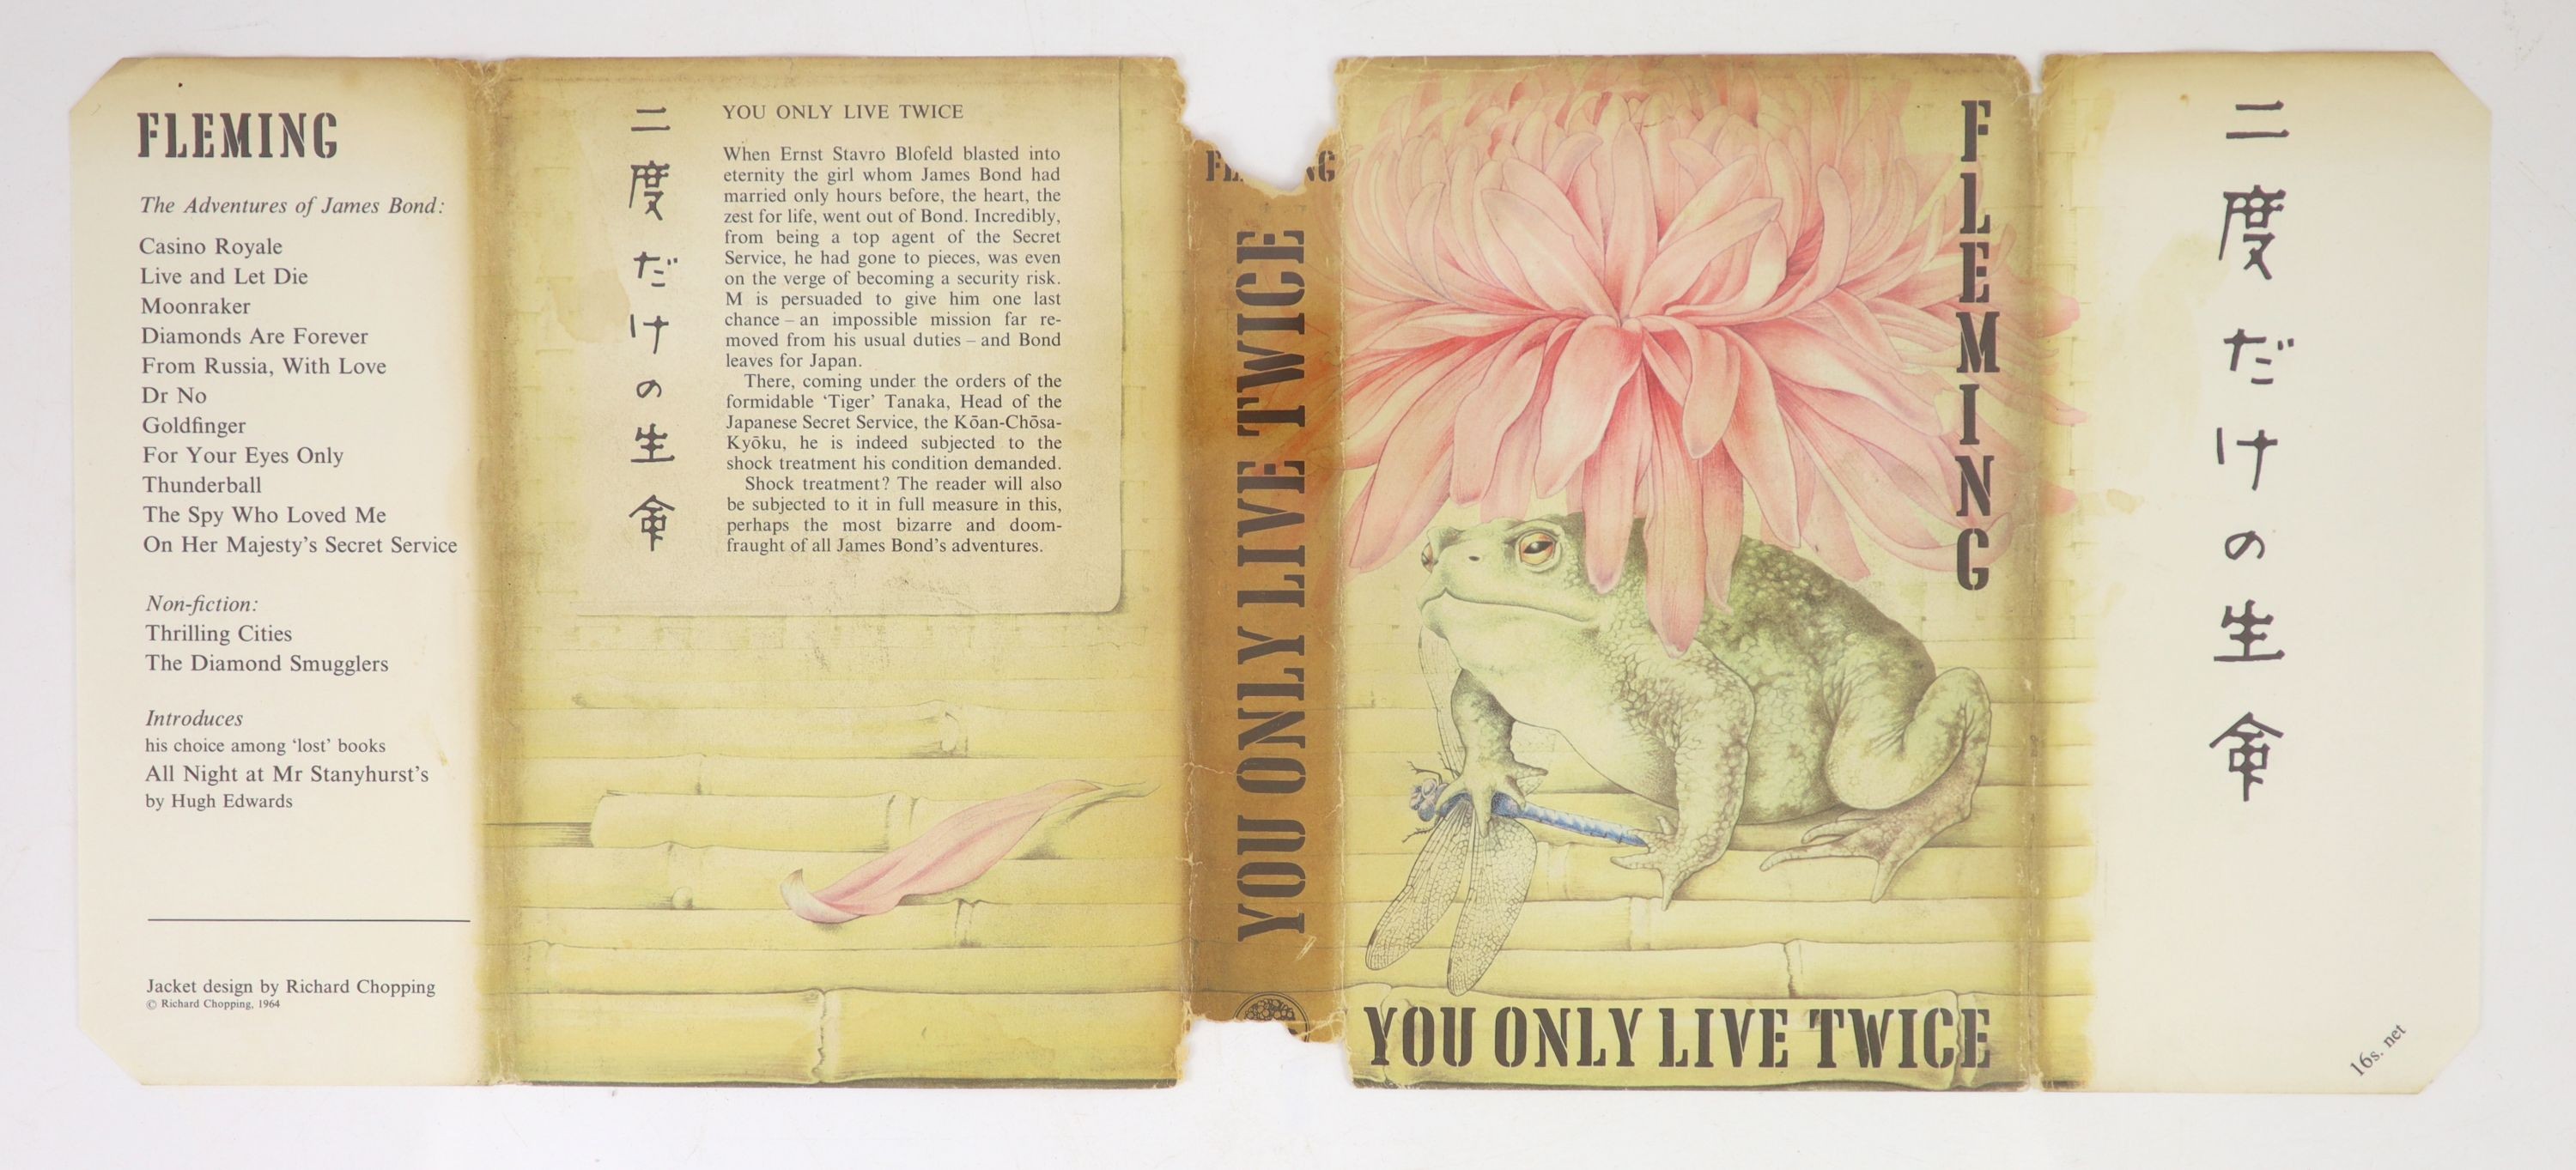 ° Fleming, Ian - You Only Live Twice, 1st edition, 8vo, black cloth with strip of seven gilt-stamped